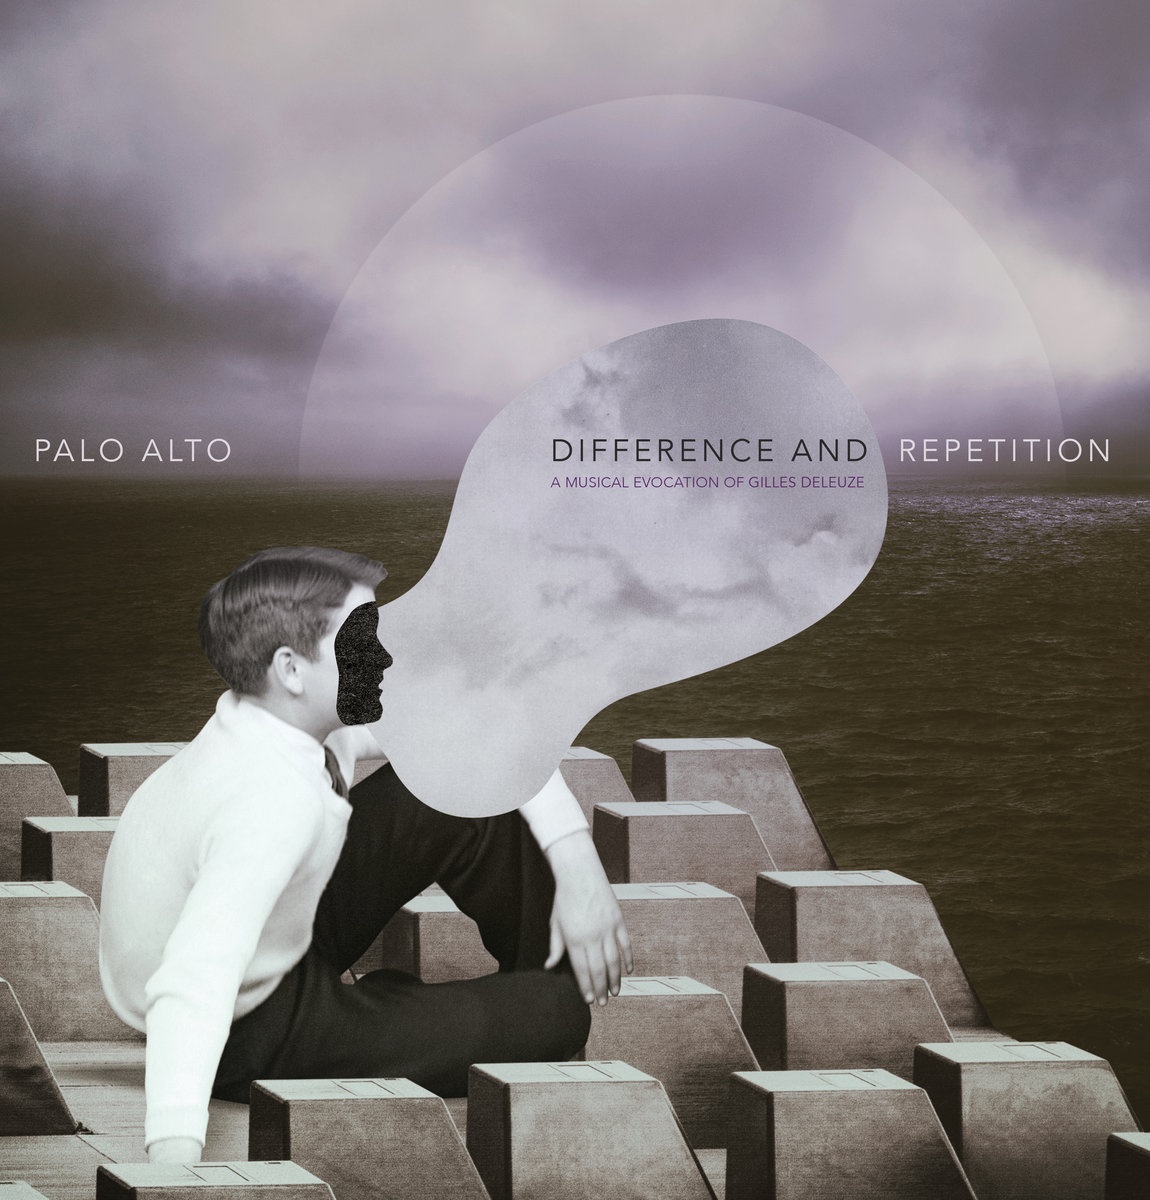 Palo Alto - Difference And Repetition - A Musical Evocation Of Gilles Deleuze vinyl cover